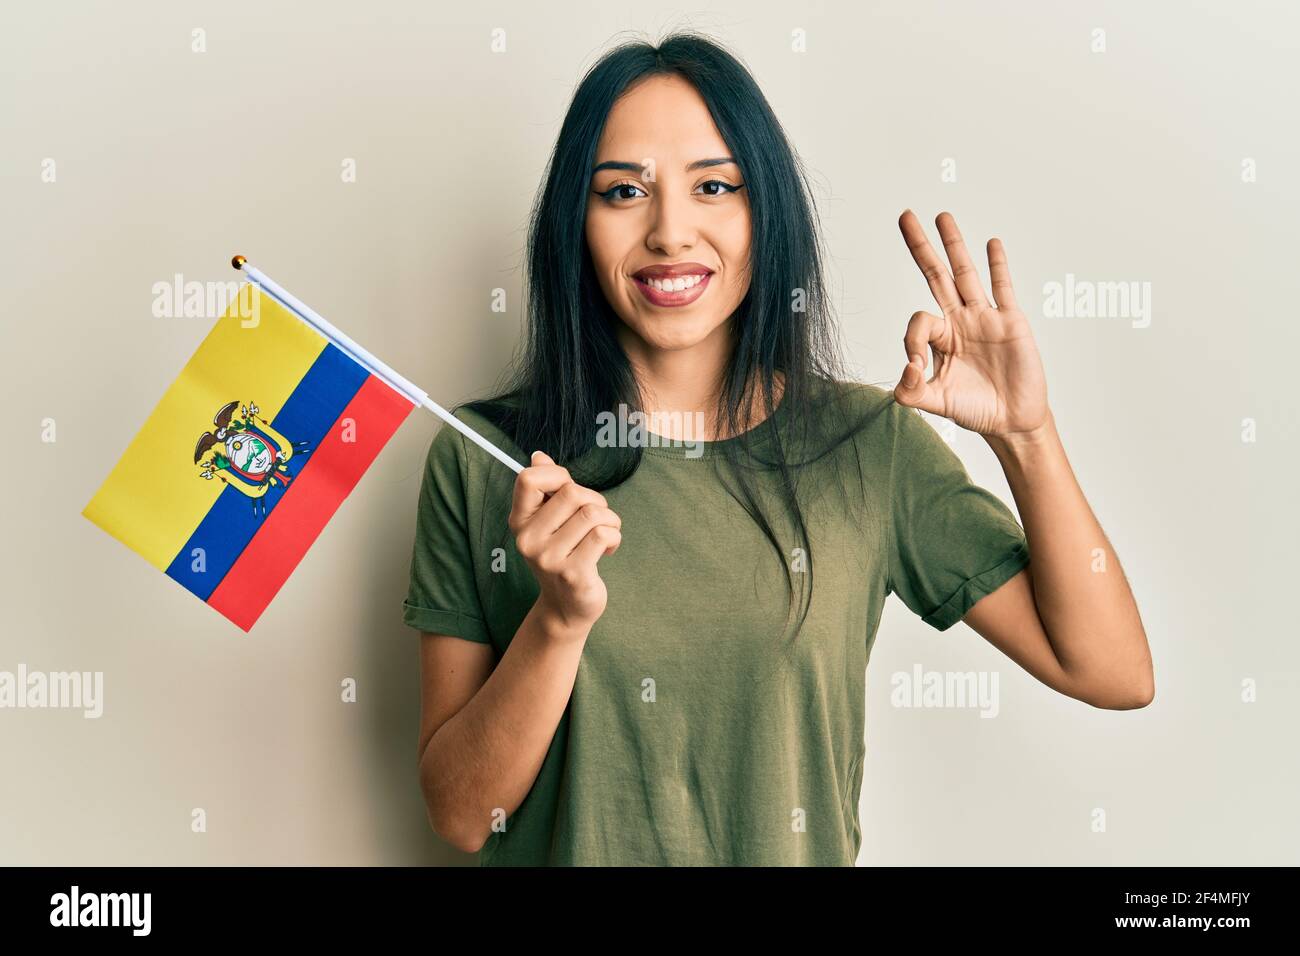 Young hispanic girl holding ecuador flag doing ok sign with fingers, smiling friendly gesturing excellent symbol Stock Photo